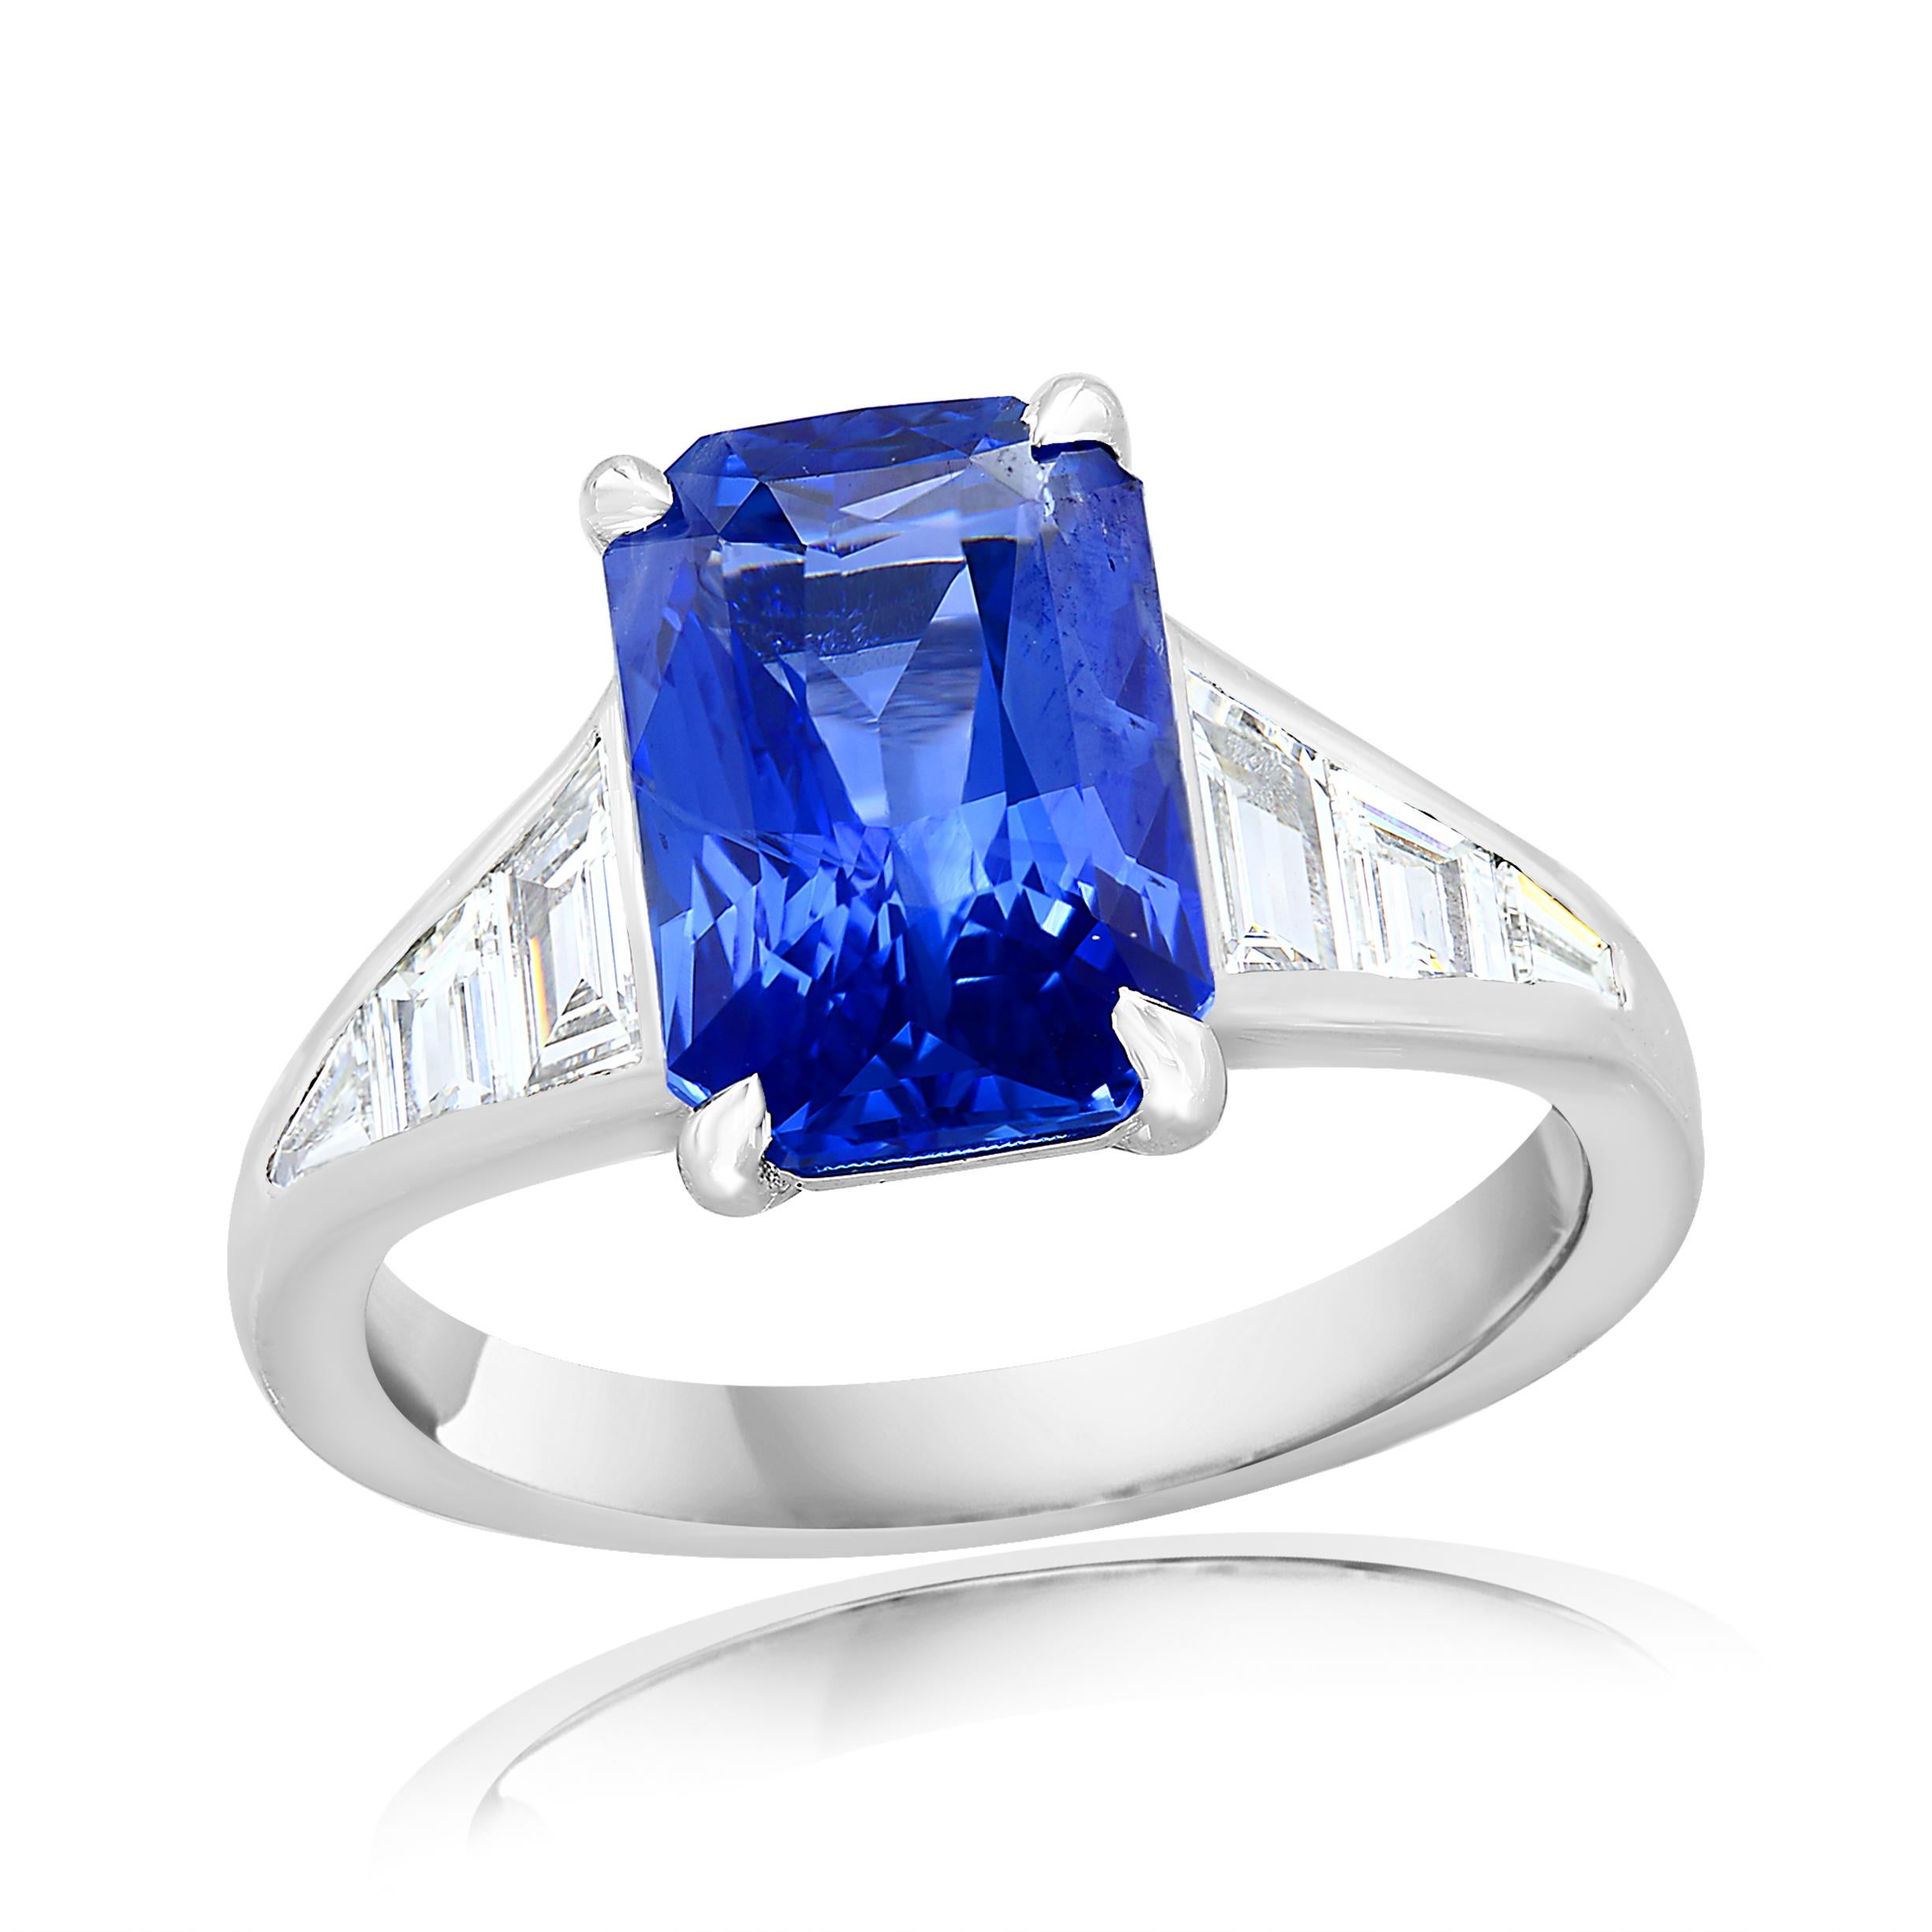 A stunning well-crafted engagement ring showcasing a 4.13-carat  emerald-cut Blue sapphire. Flanking the center diamond are perfectly matched graduating step-cut diamonds, channel set in a polished platinum mounting. 6 Accent diamonds weigh 0.65